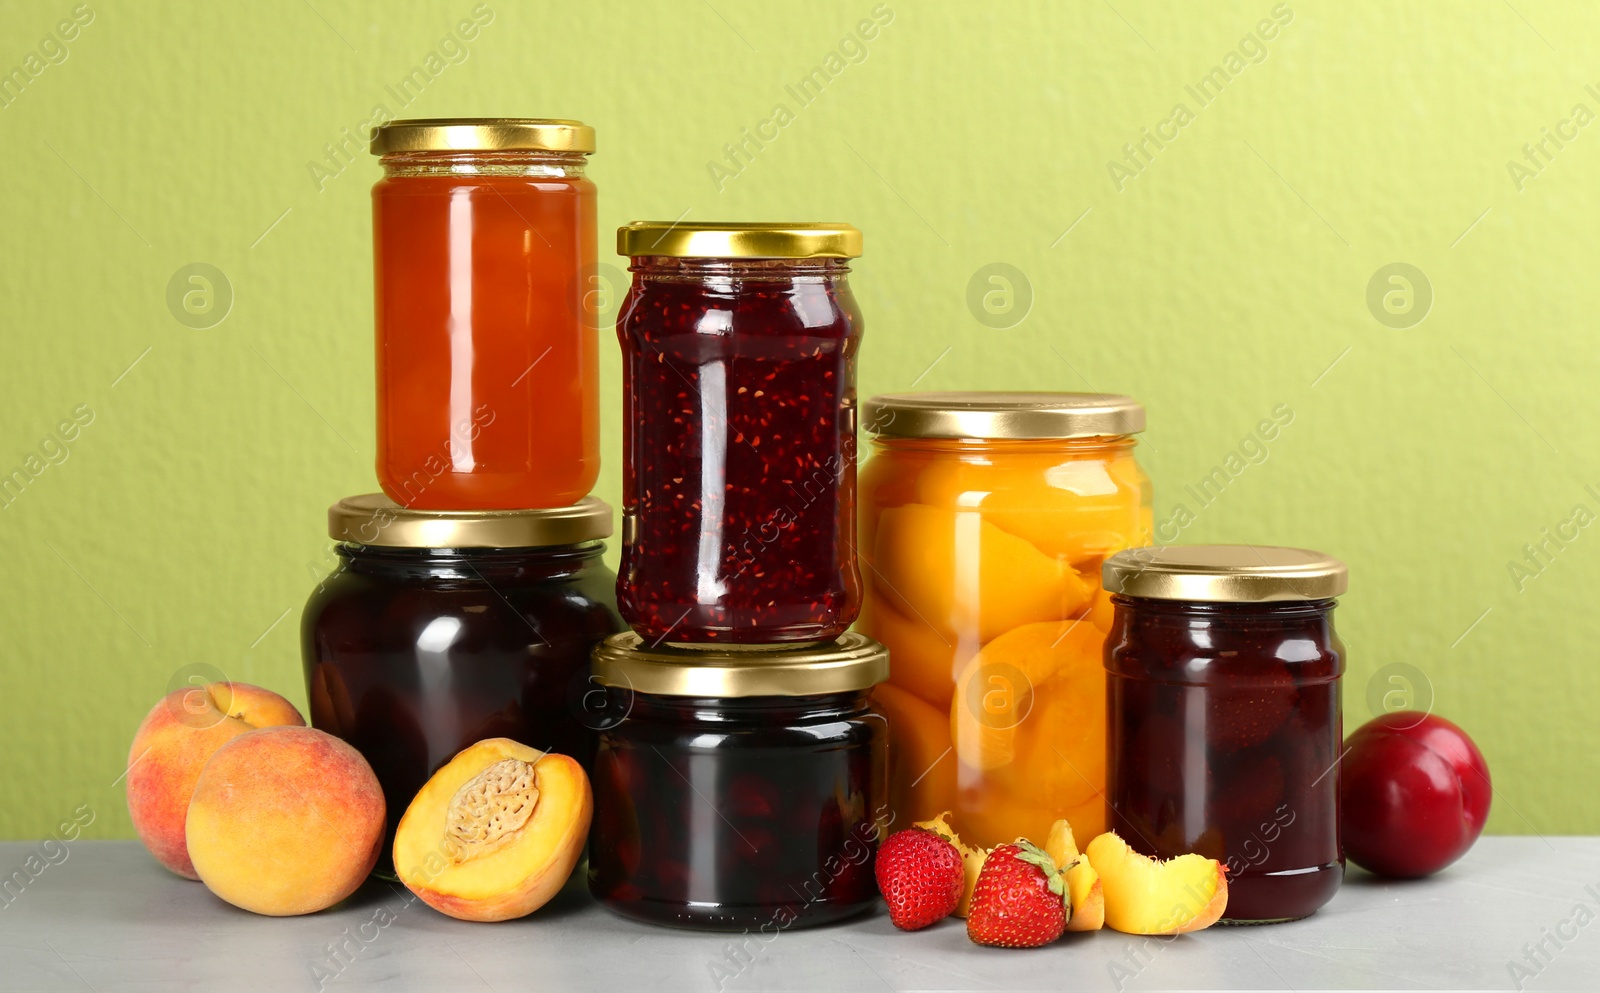 Photo of Jars of pickled fruits and jams on light table